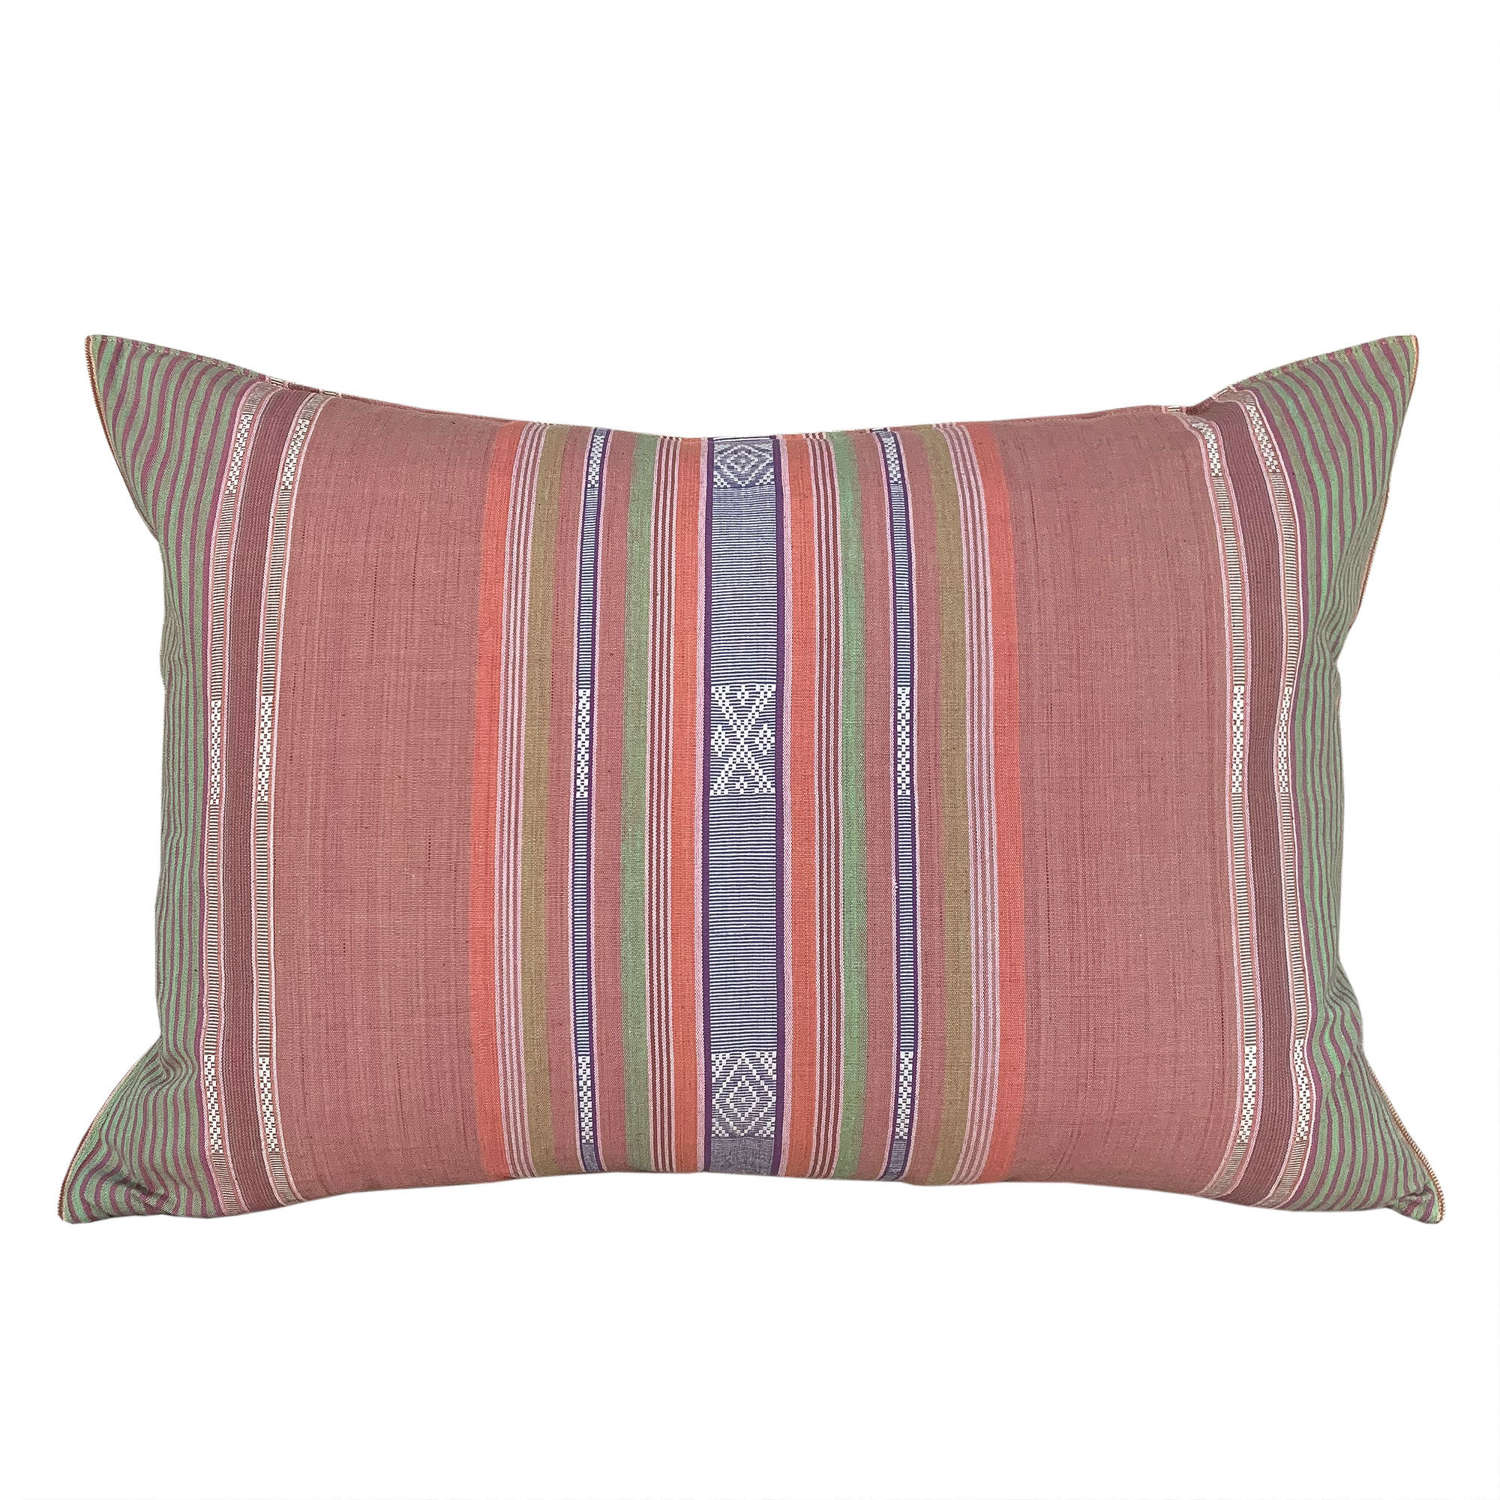 Lombok Cushions, Coral And Green